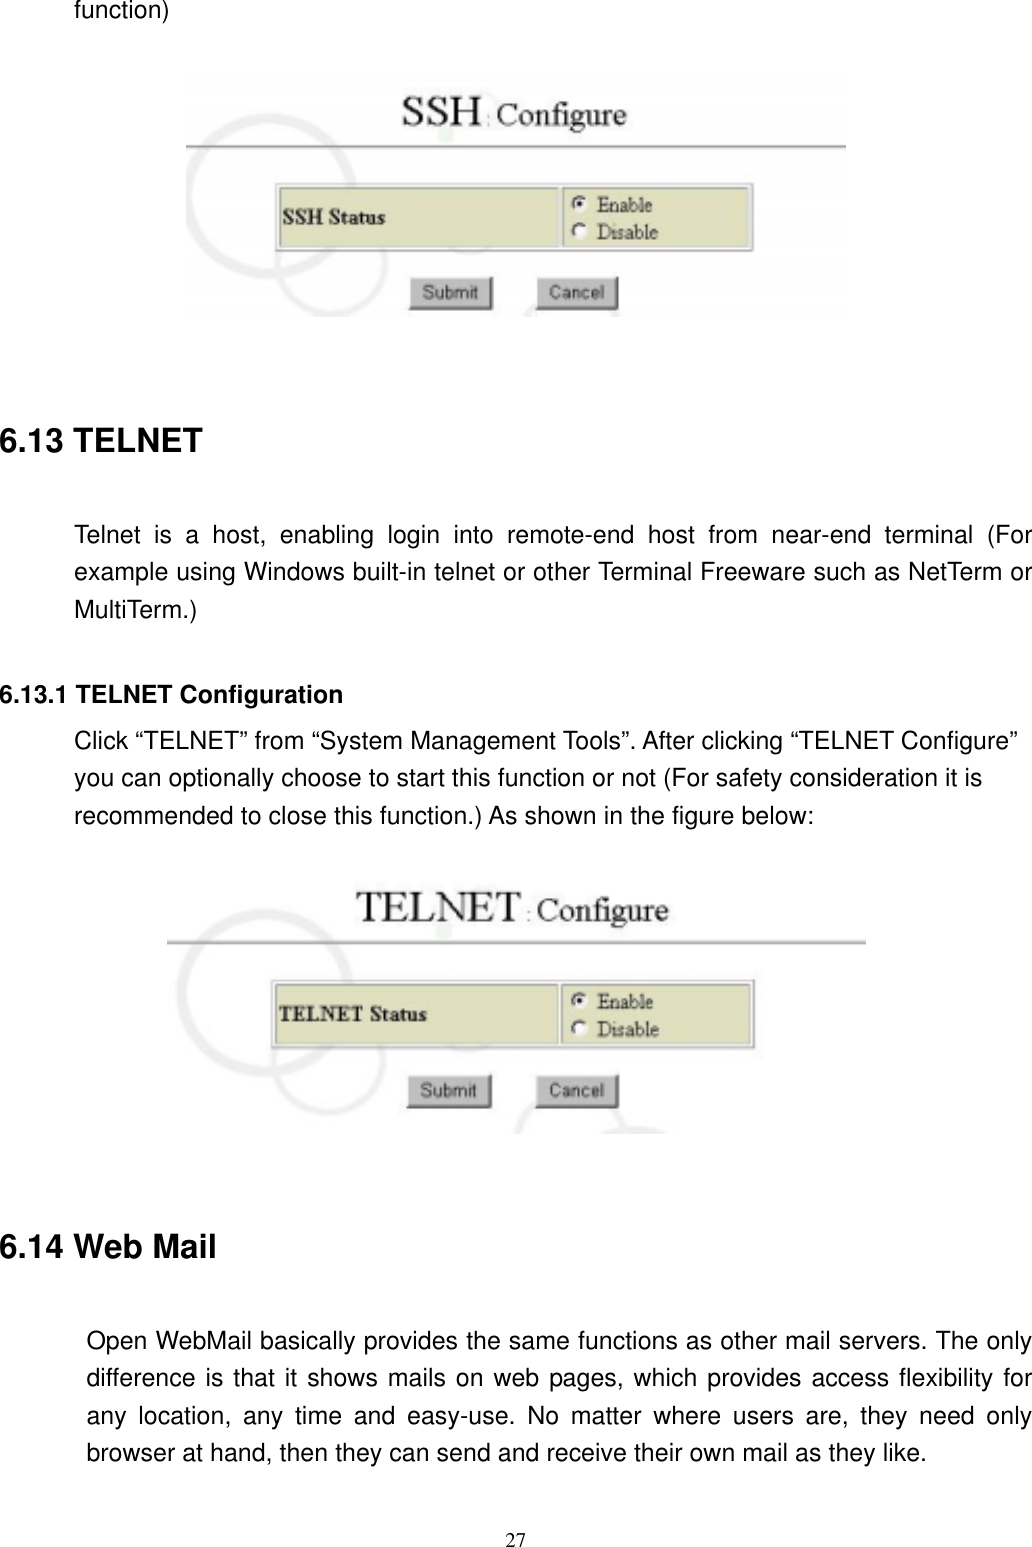  27function)     6.13 TELNET  Telnet is a host, enabling login into remote-end host from near-end terminal (For example using Windows built-in telnet or other Terminal Freeware such as NetTerm or MultiTerm.)  6.13.1 TELNET Configuration Click “TELNET” from “System Management Tools”. After clicking “TELNET Configure” you can optionally choose to start this function or not (For safety consideration it is recommended to close this function.) As shown in the figure below:     6.14 Web Mail  Open WebMail basically provides the same functions as other mail servers. The only difference is that it shows mails on web pages, which provides access flexibility for any location, any time and easy-use. No matter where users are, they need only browser at hand, then they can send and receive their own mail as they like.    